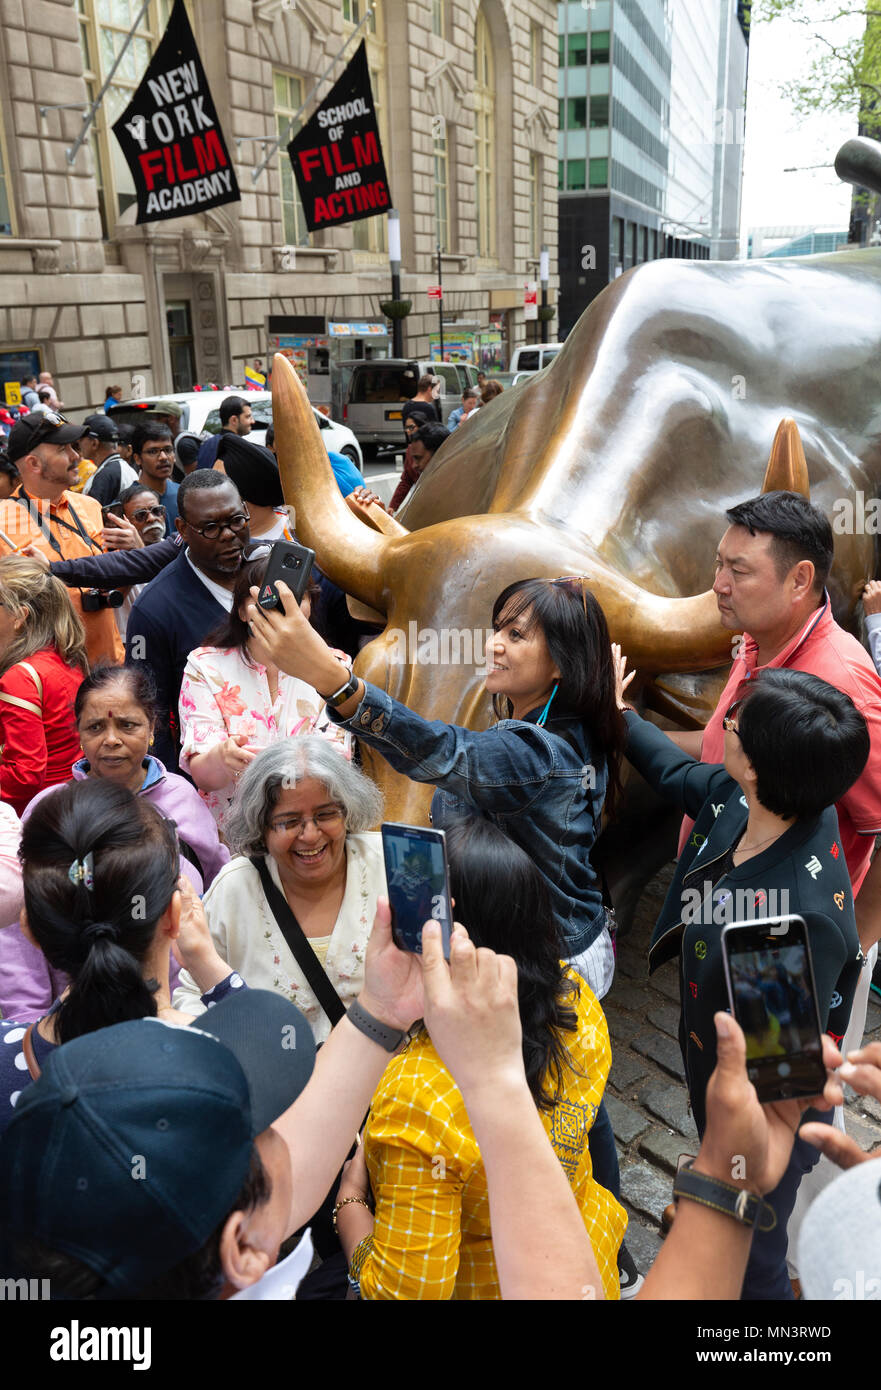 Crowds of tourists taking photos around the Wall street bull, or Charging Bull, by Arturo Di Modica, Downtown New York City, USA Stock Photo